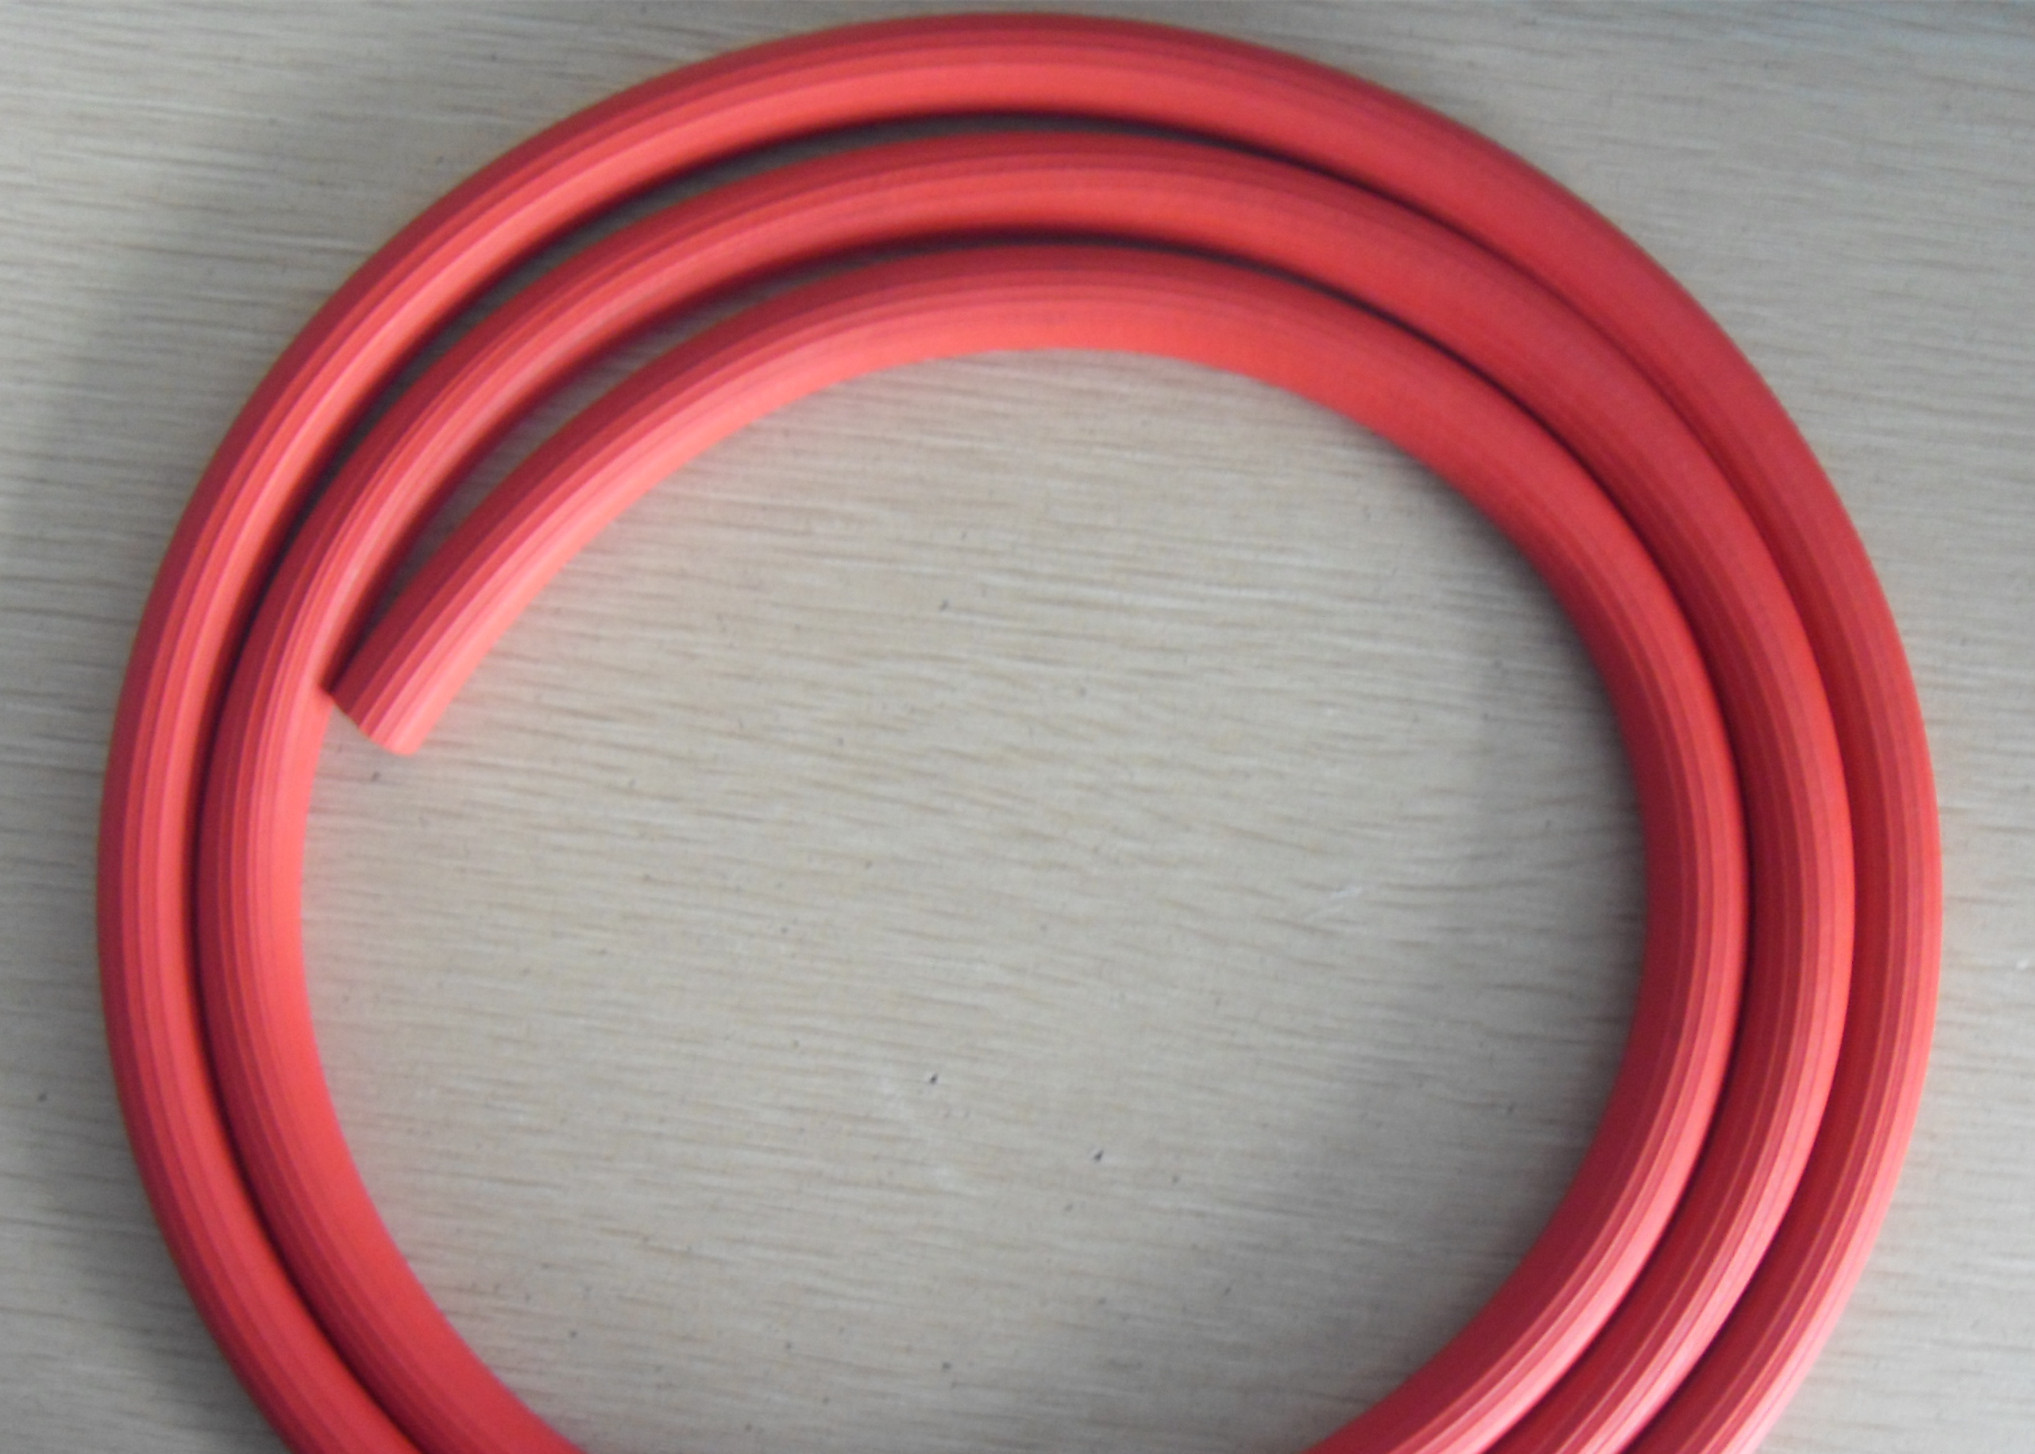  Red Groove Surface Rubber Air Hose , Recoil Air Hose  ID 3 / 16" To 1" Manufactures